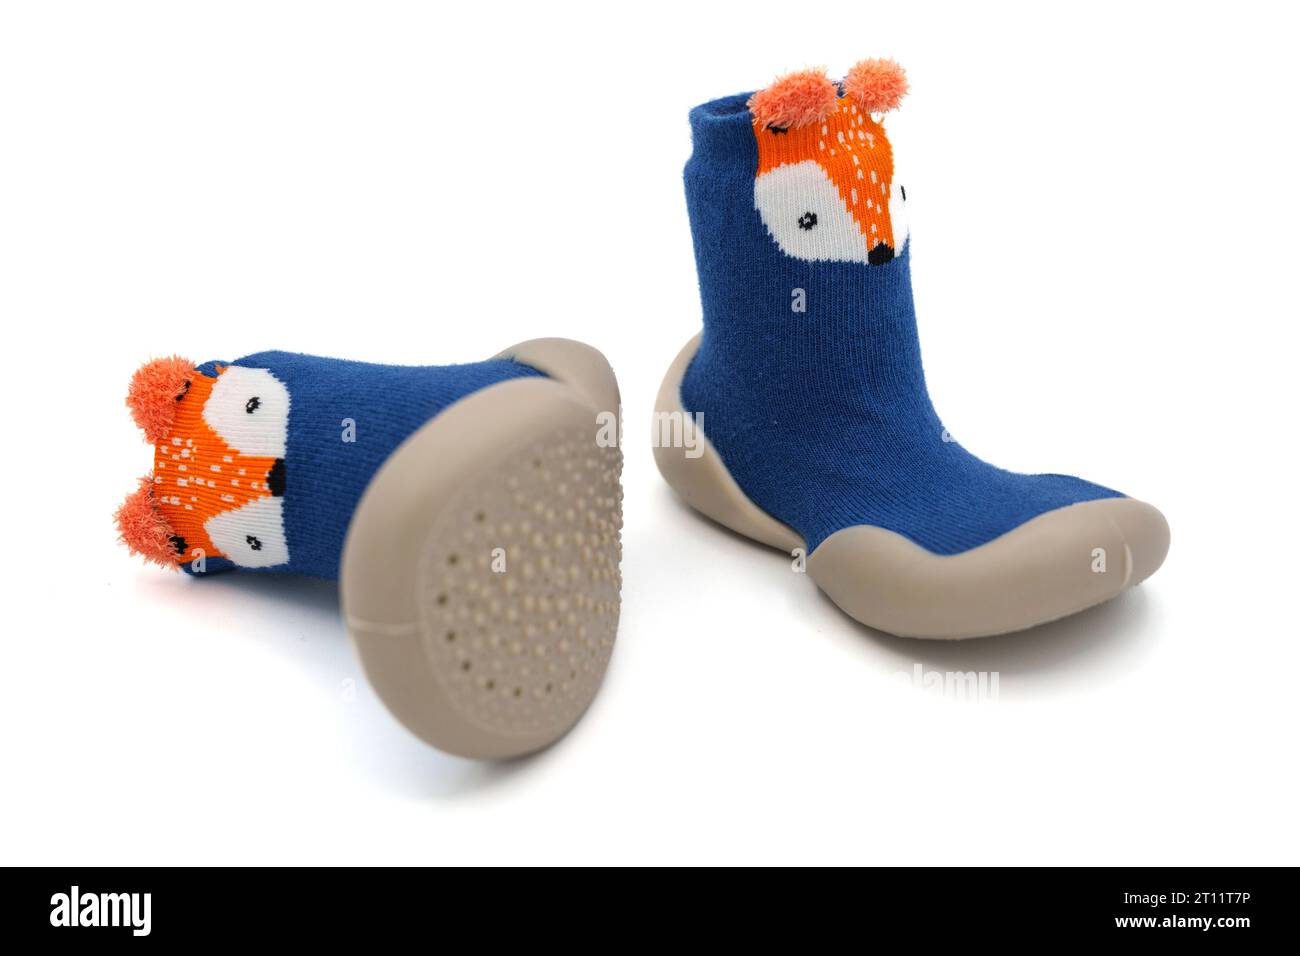 Pair of cute blue baby shoes with a cartoon fox for toddlers first steps cut out isolated on white background Stock Photo